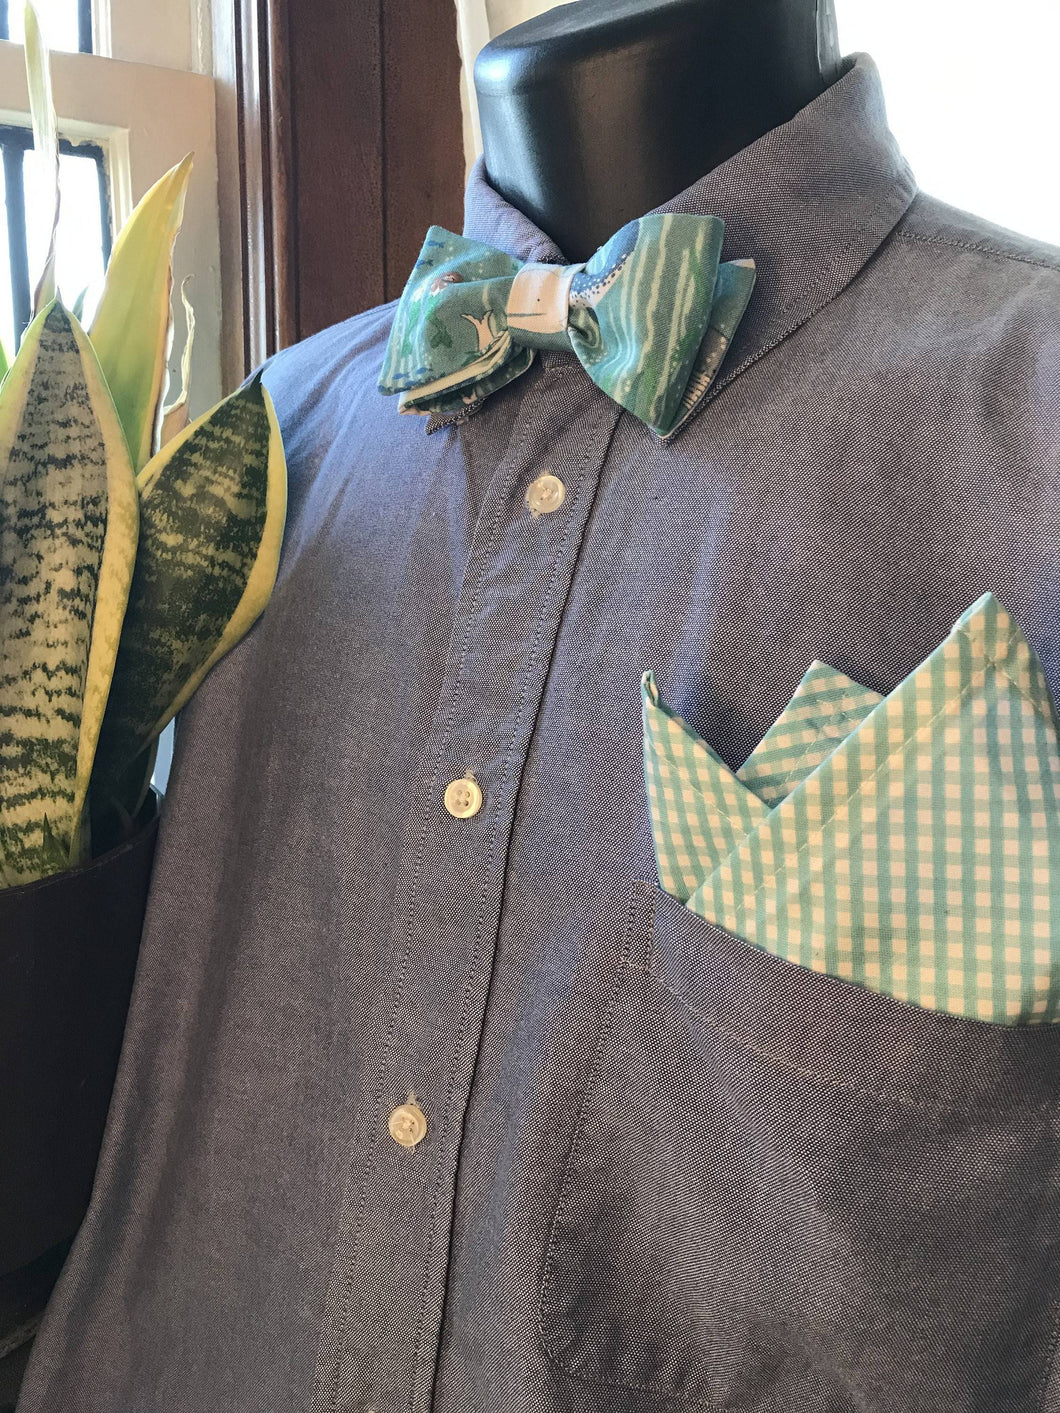 Mermaid Bow Tie and Gingham Pocket Square